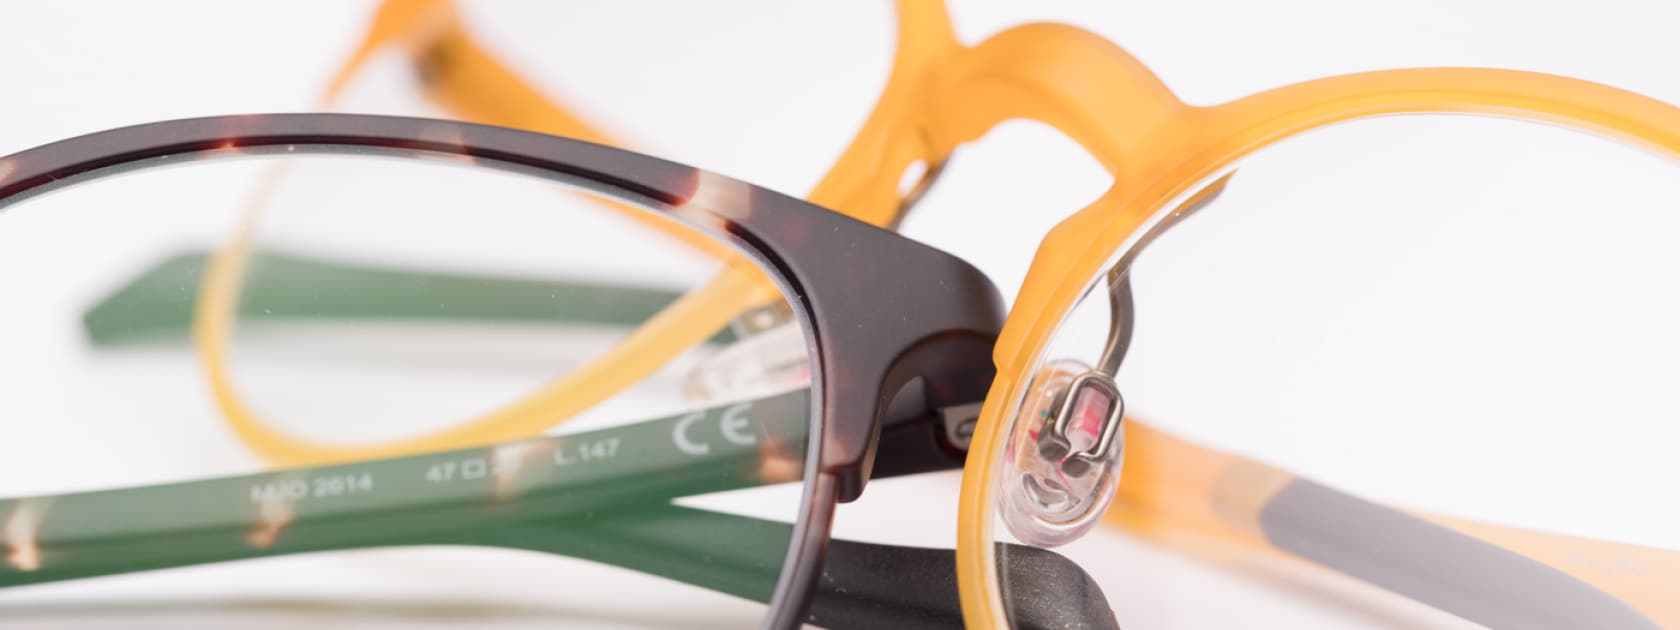 detailed close up view of ophthalmic glasses